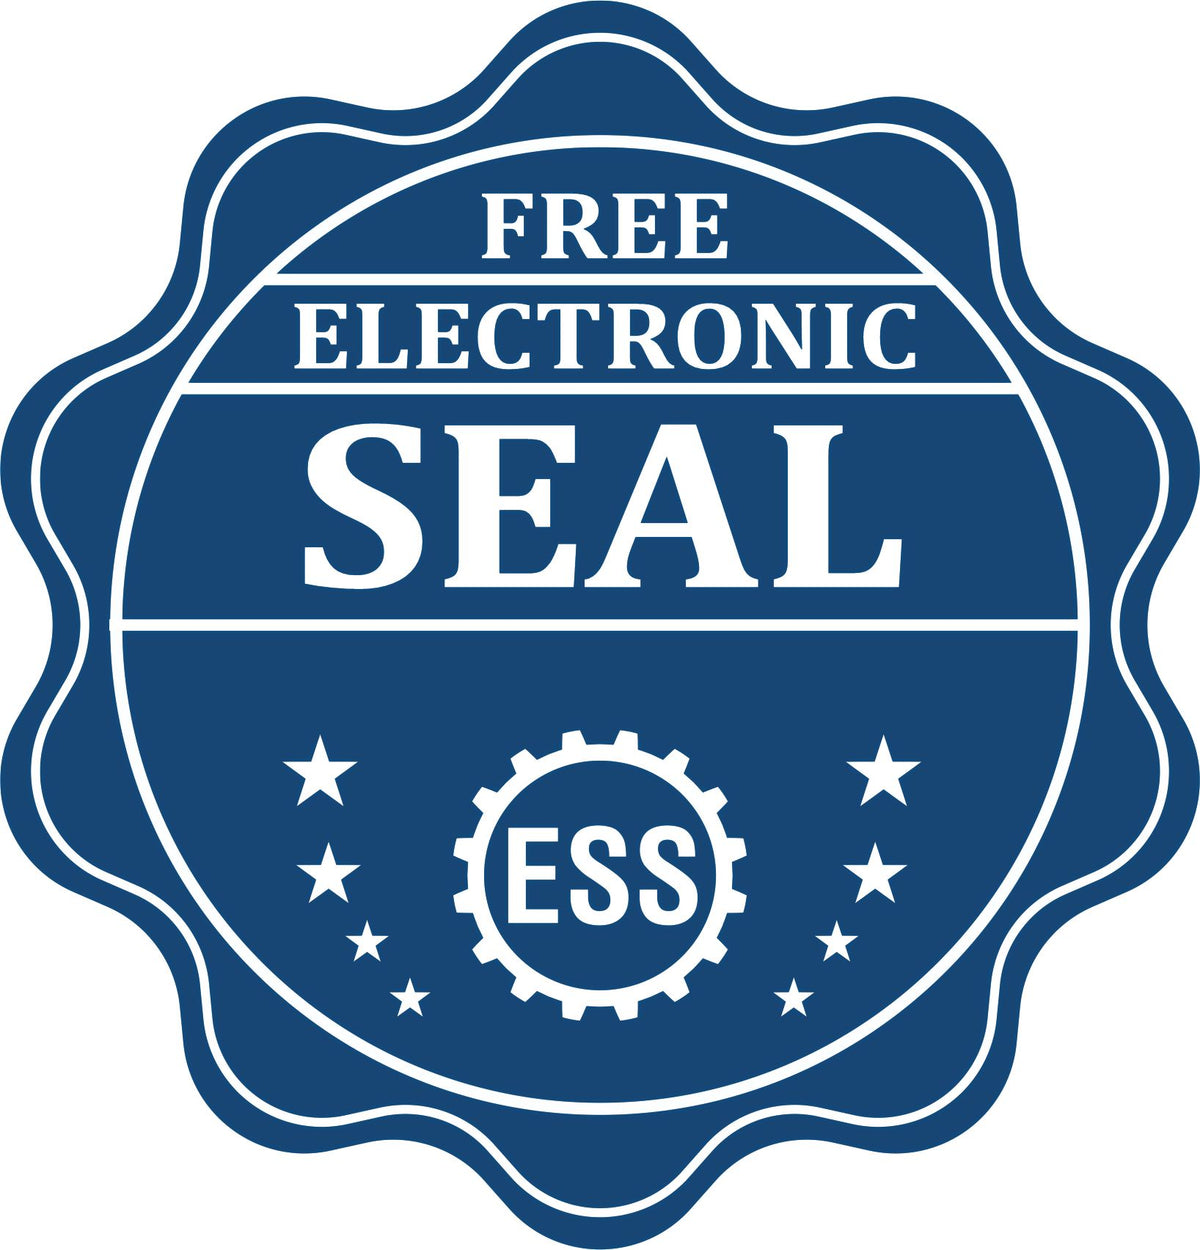 A badge showing a free electronic seal for the Slim Pre-Inked Vermont Professional Geologist Seal Stamp with stars and the ESS gear on the emblem.